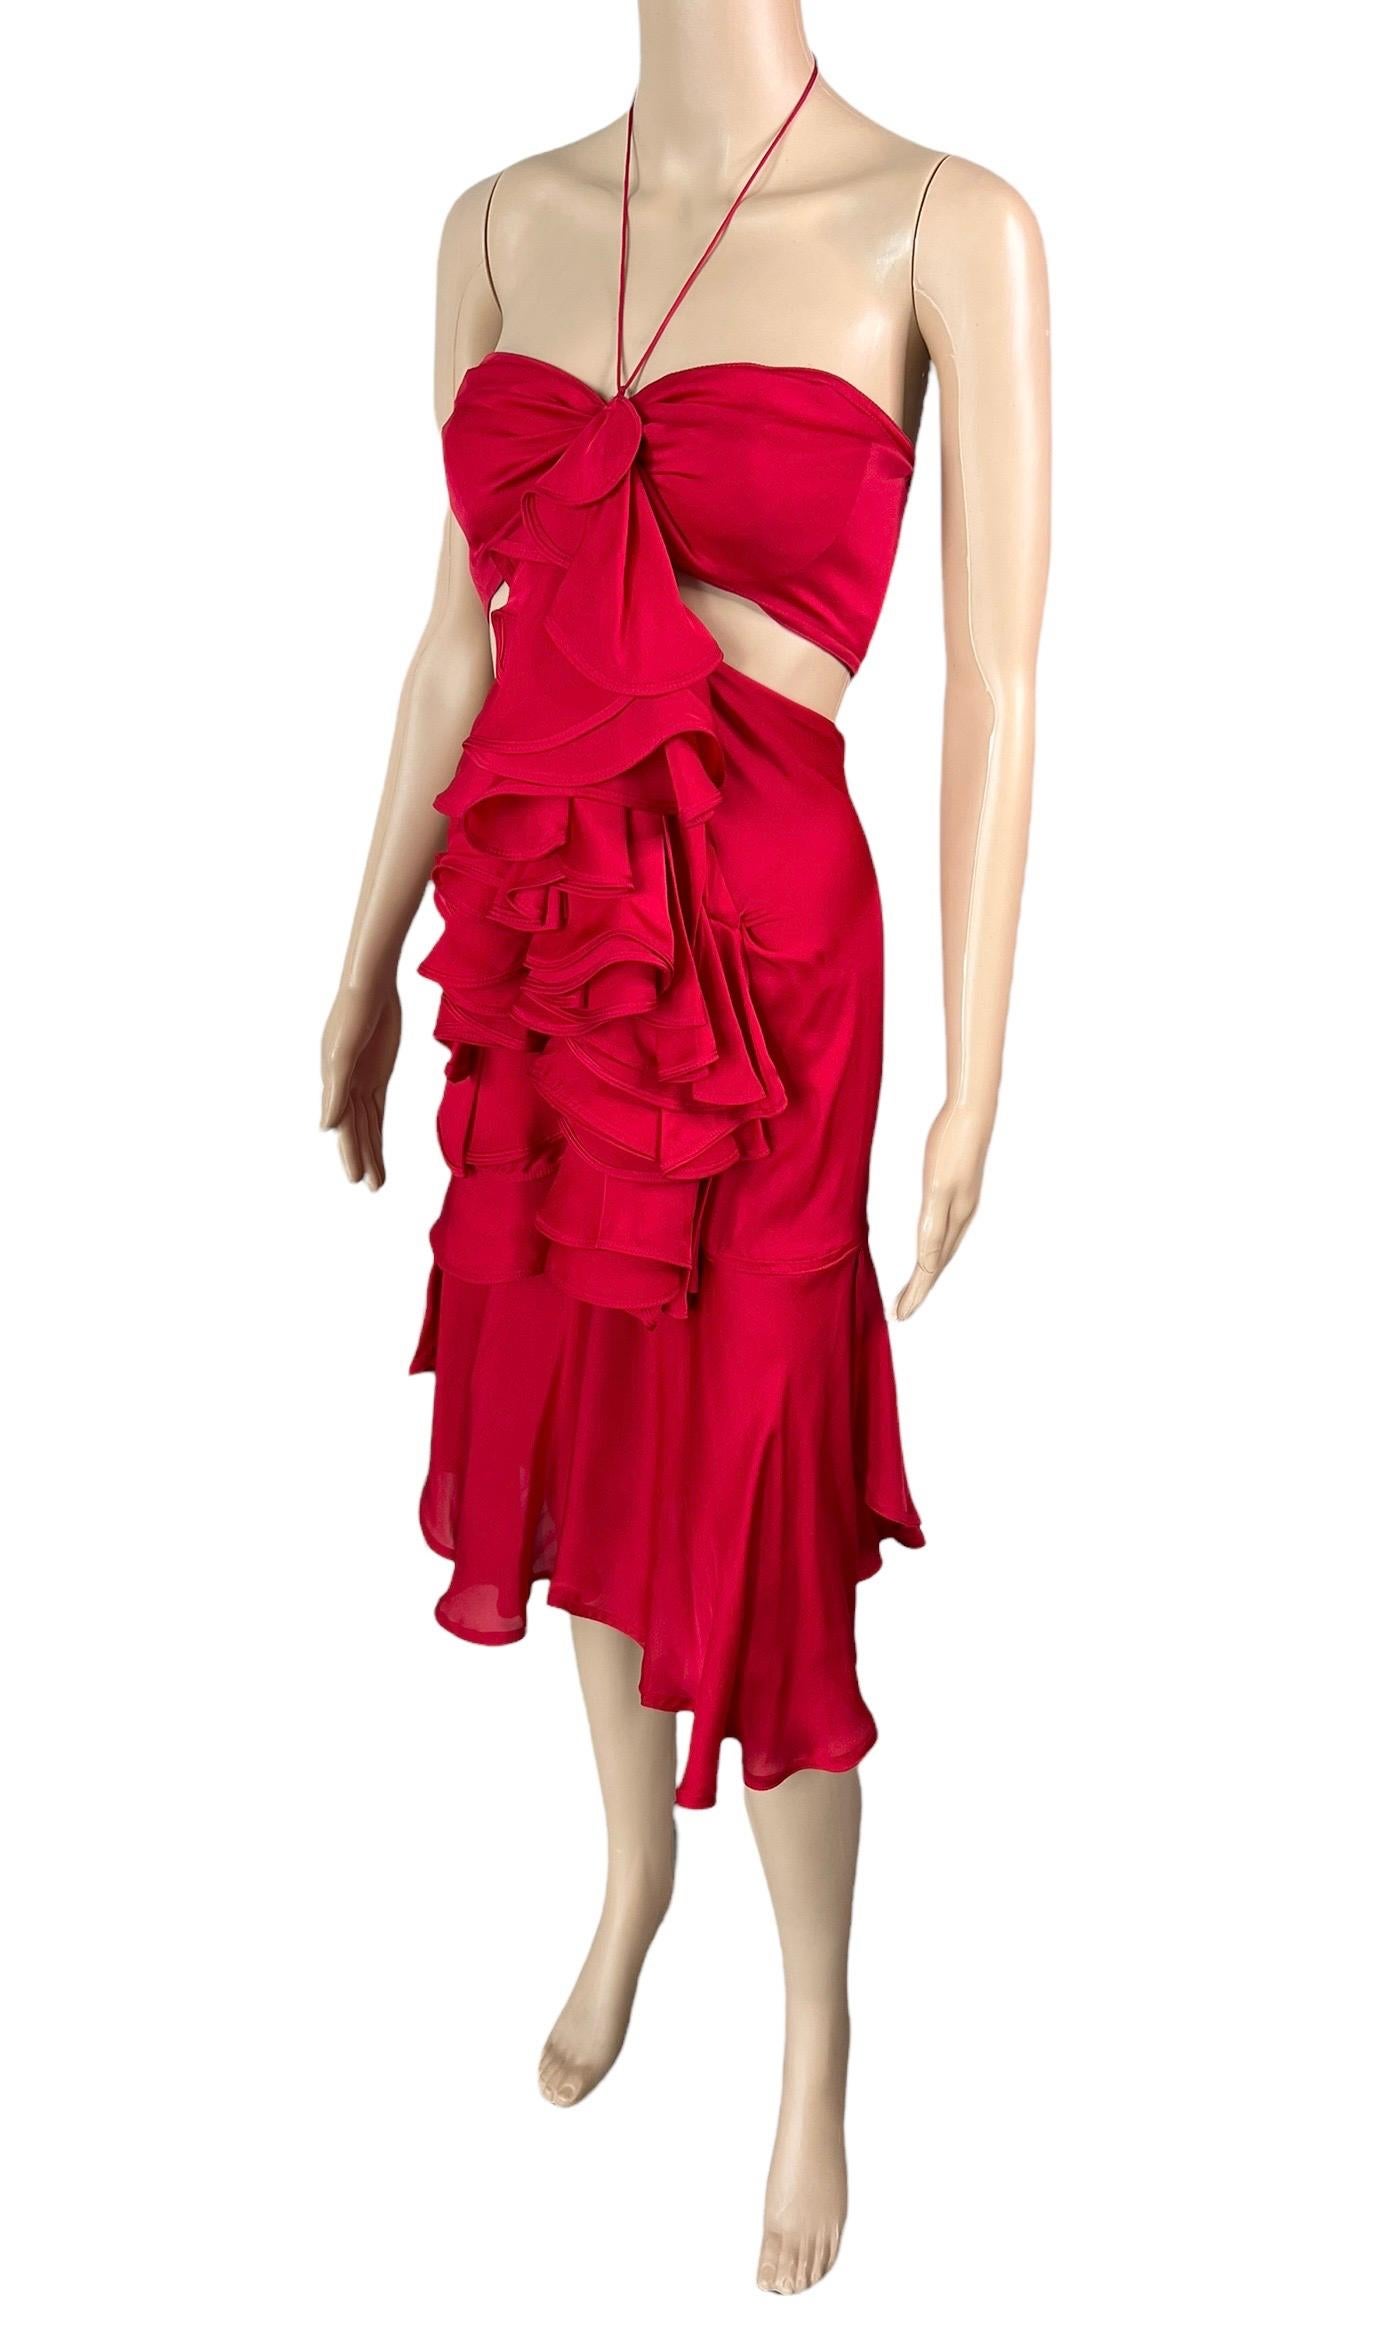 Tom Ford for Yves Saint Laurent YSL F/W 2003 Runway Ruffled Cutout Bra Red Dress FR 36

Look 23 from the Fall 2003 Runway.


